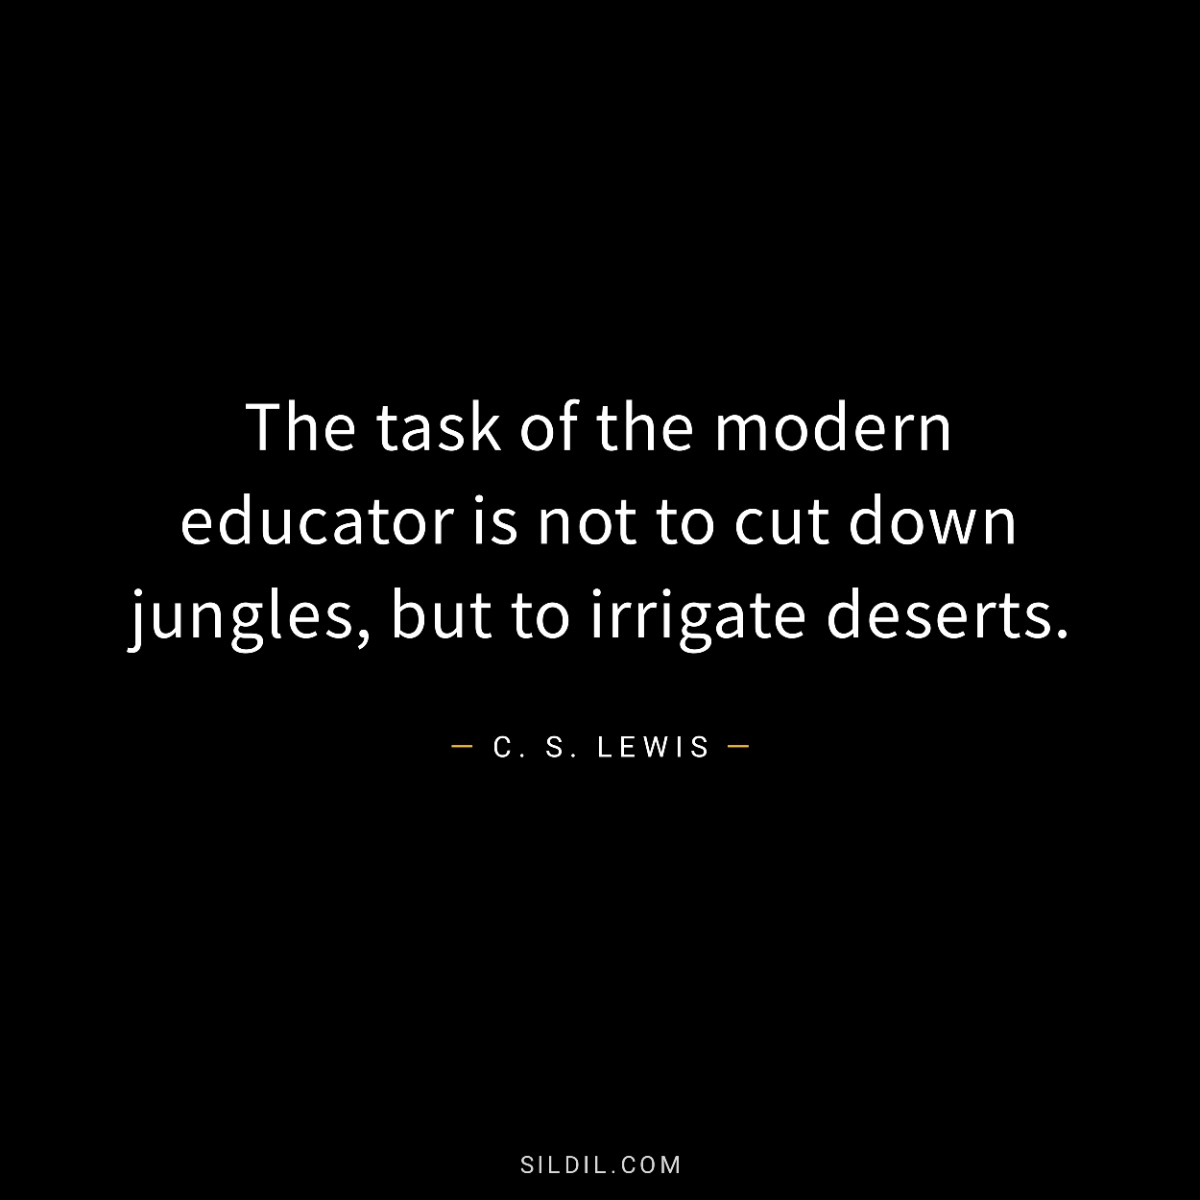 The task of the modern educator is not to cut down jungles, but to irrigate deserts.